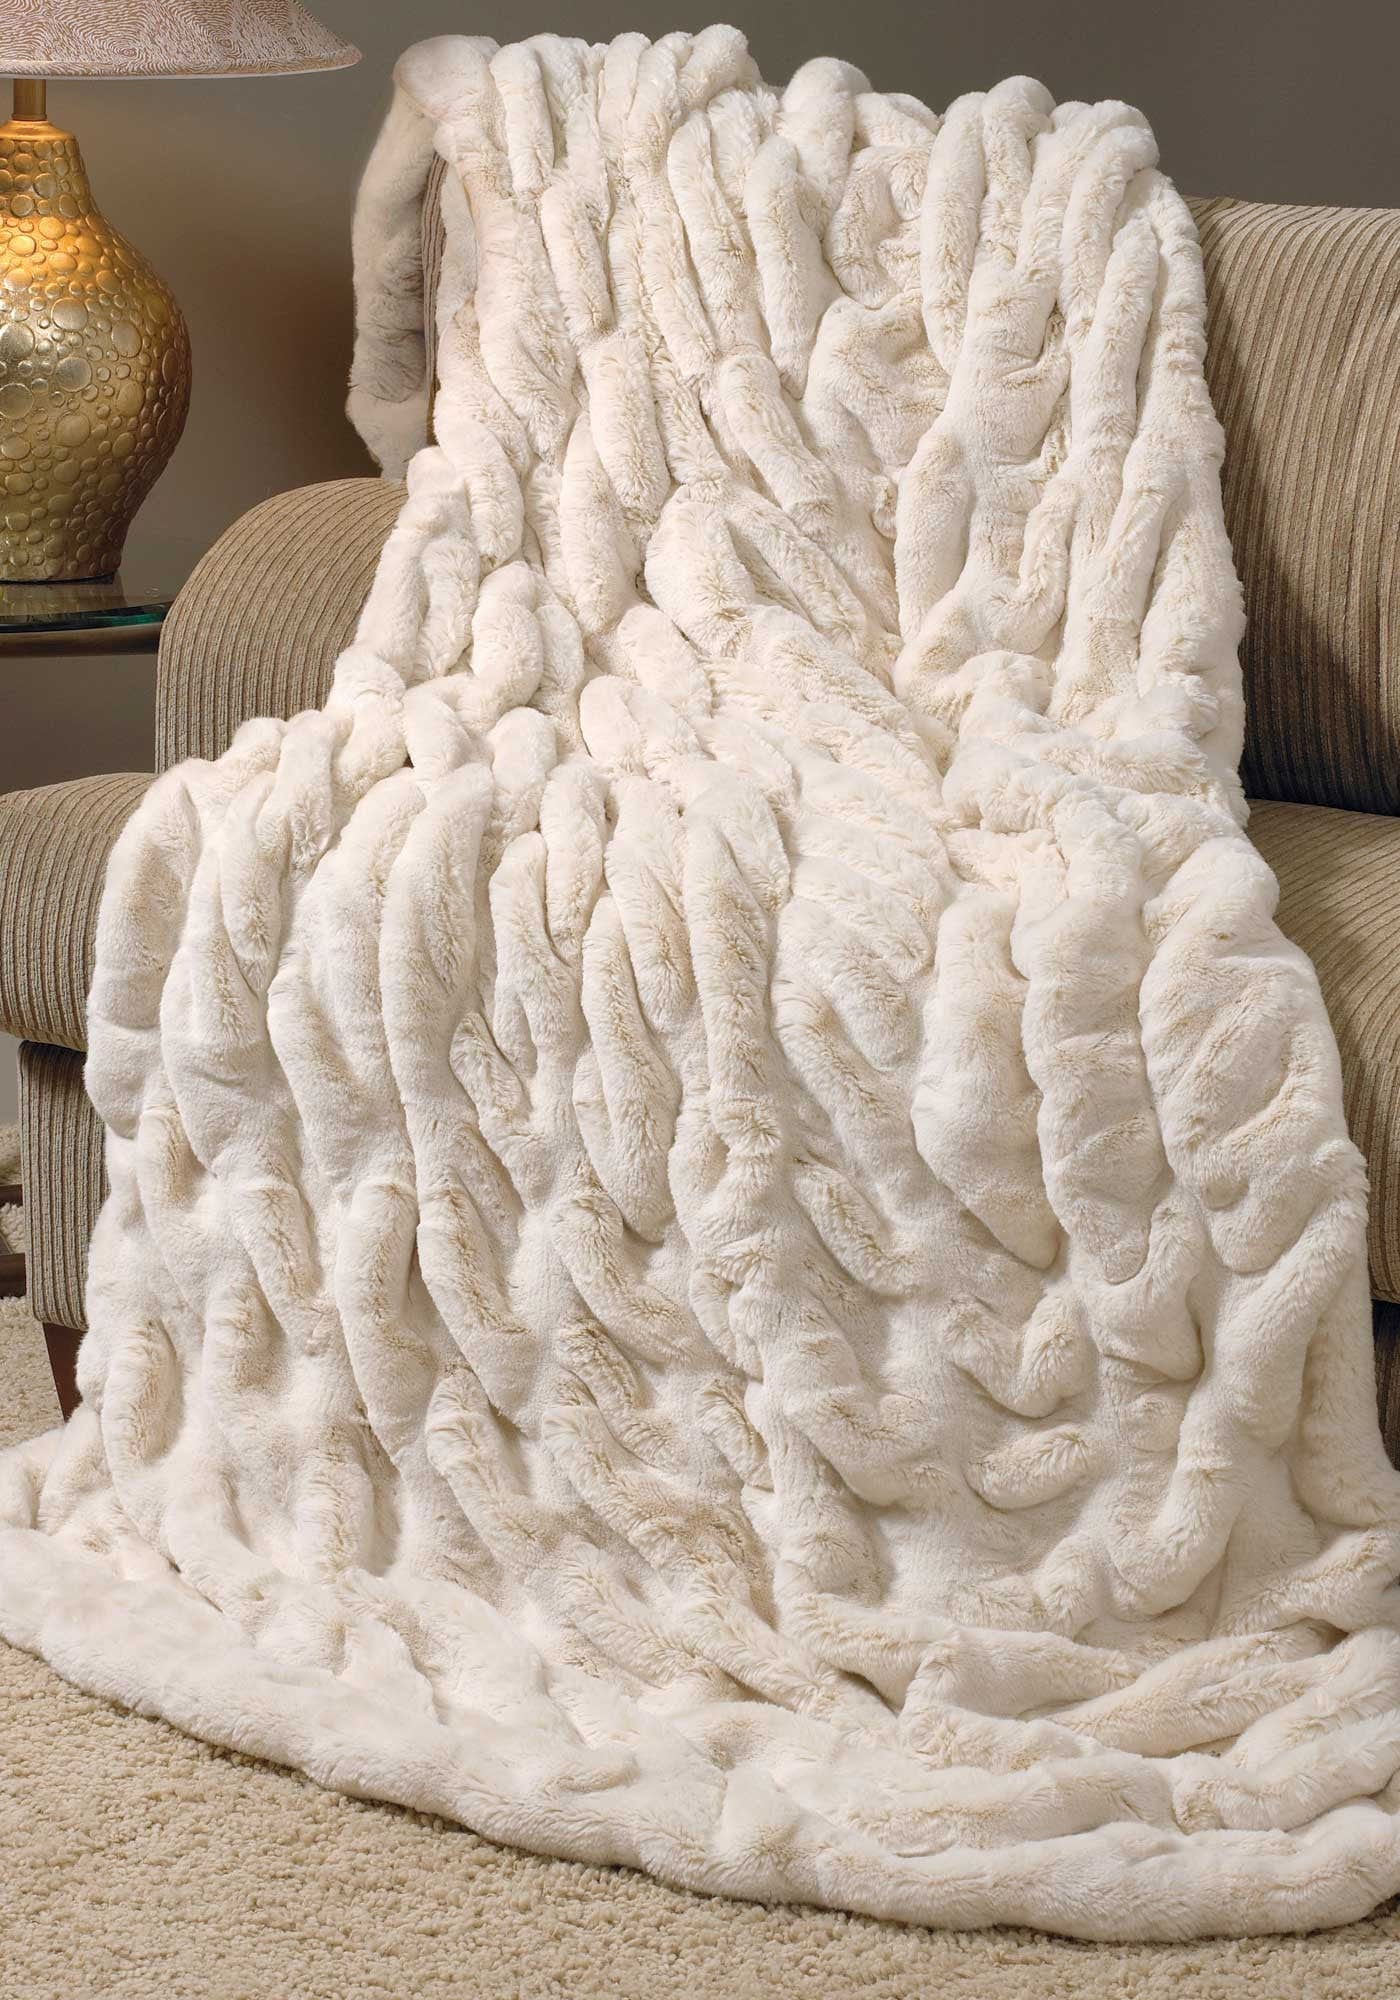 Ivory faux fur throw blanket on chaise